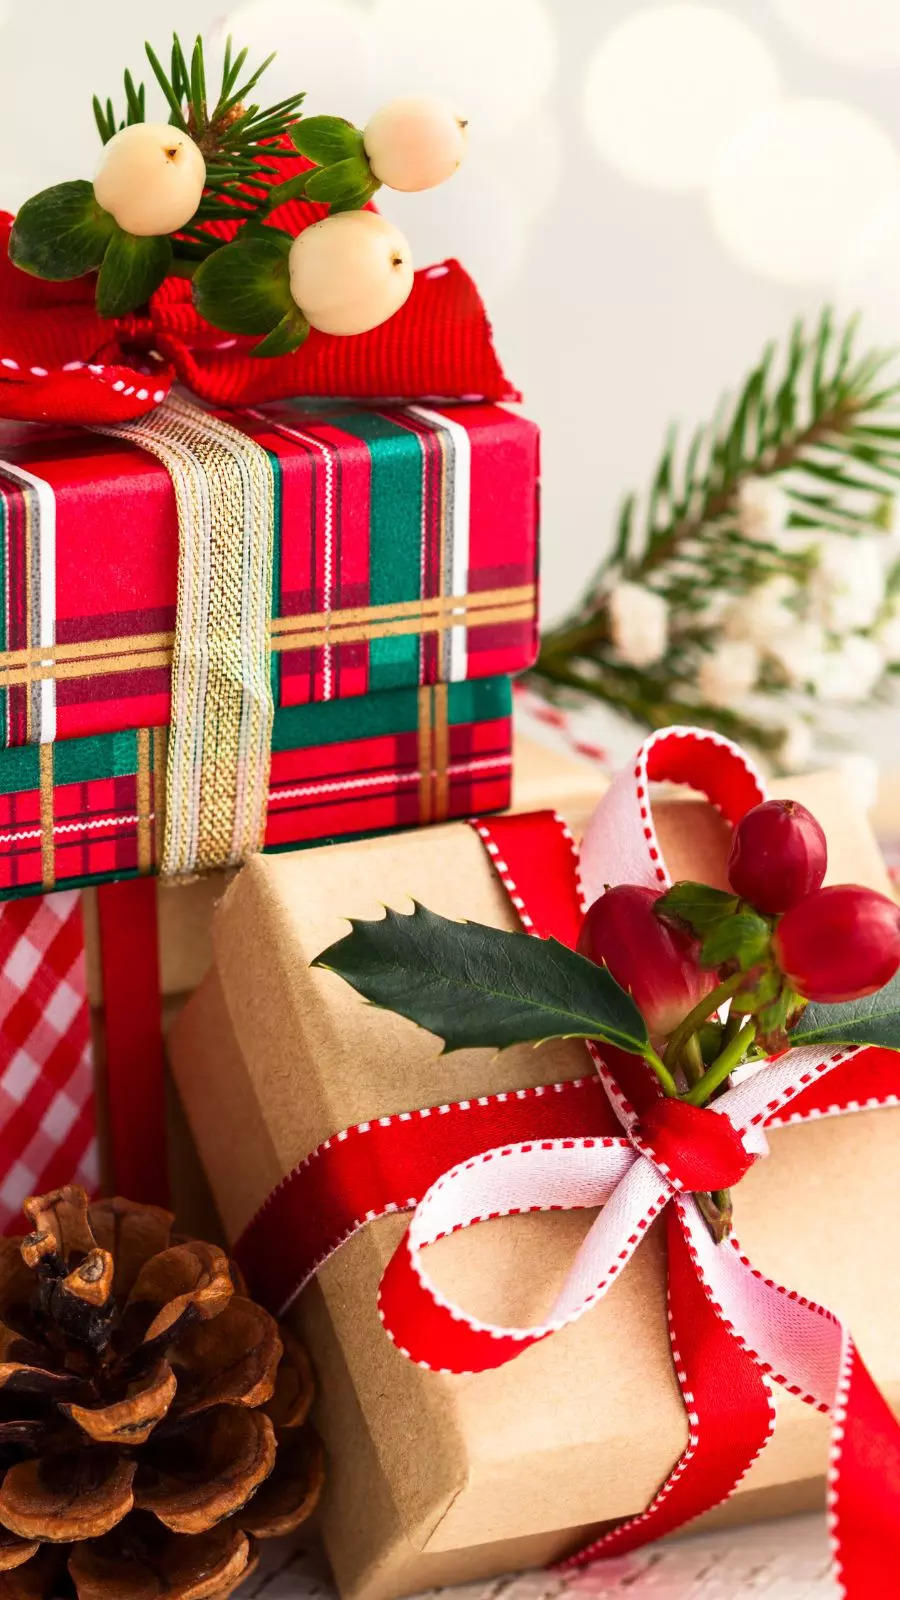 Easy DIY Christmas gift ideas for your loved ones